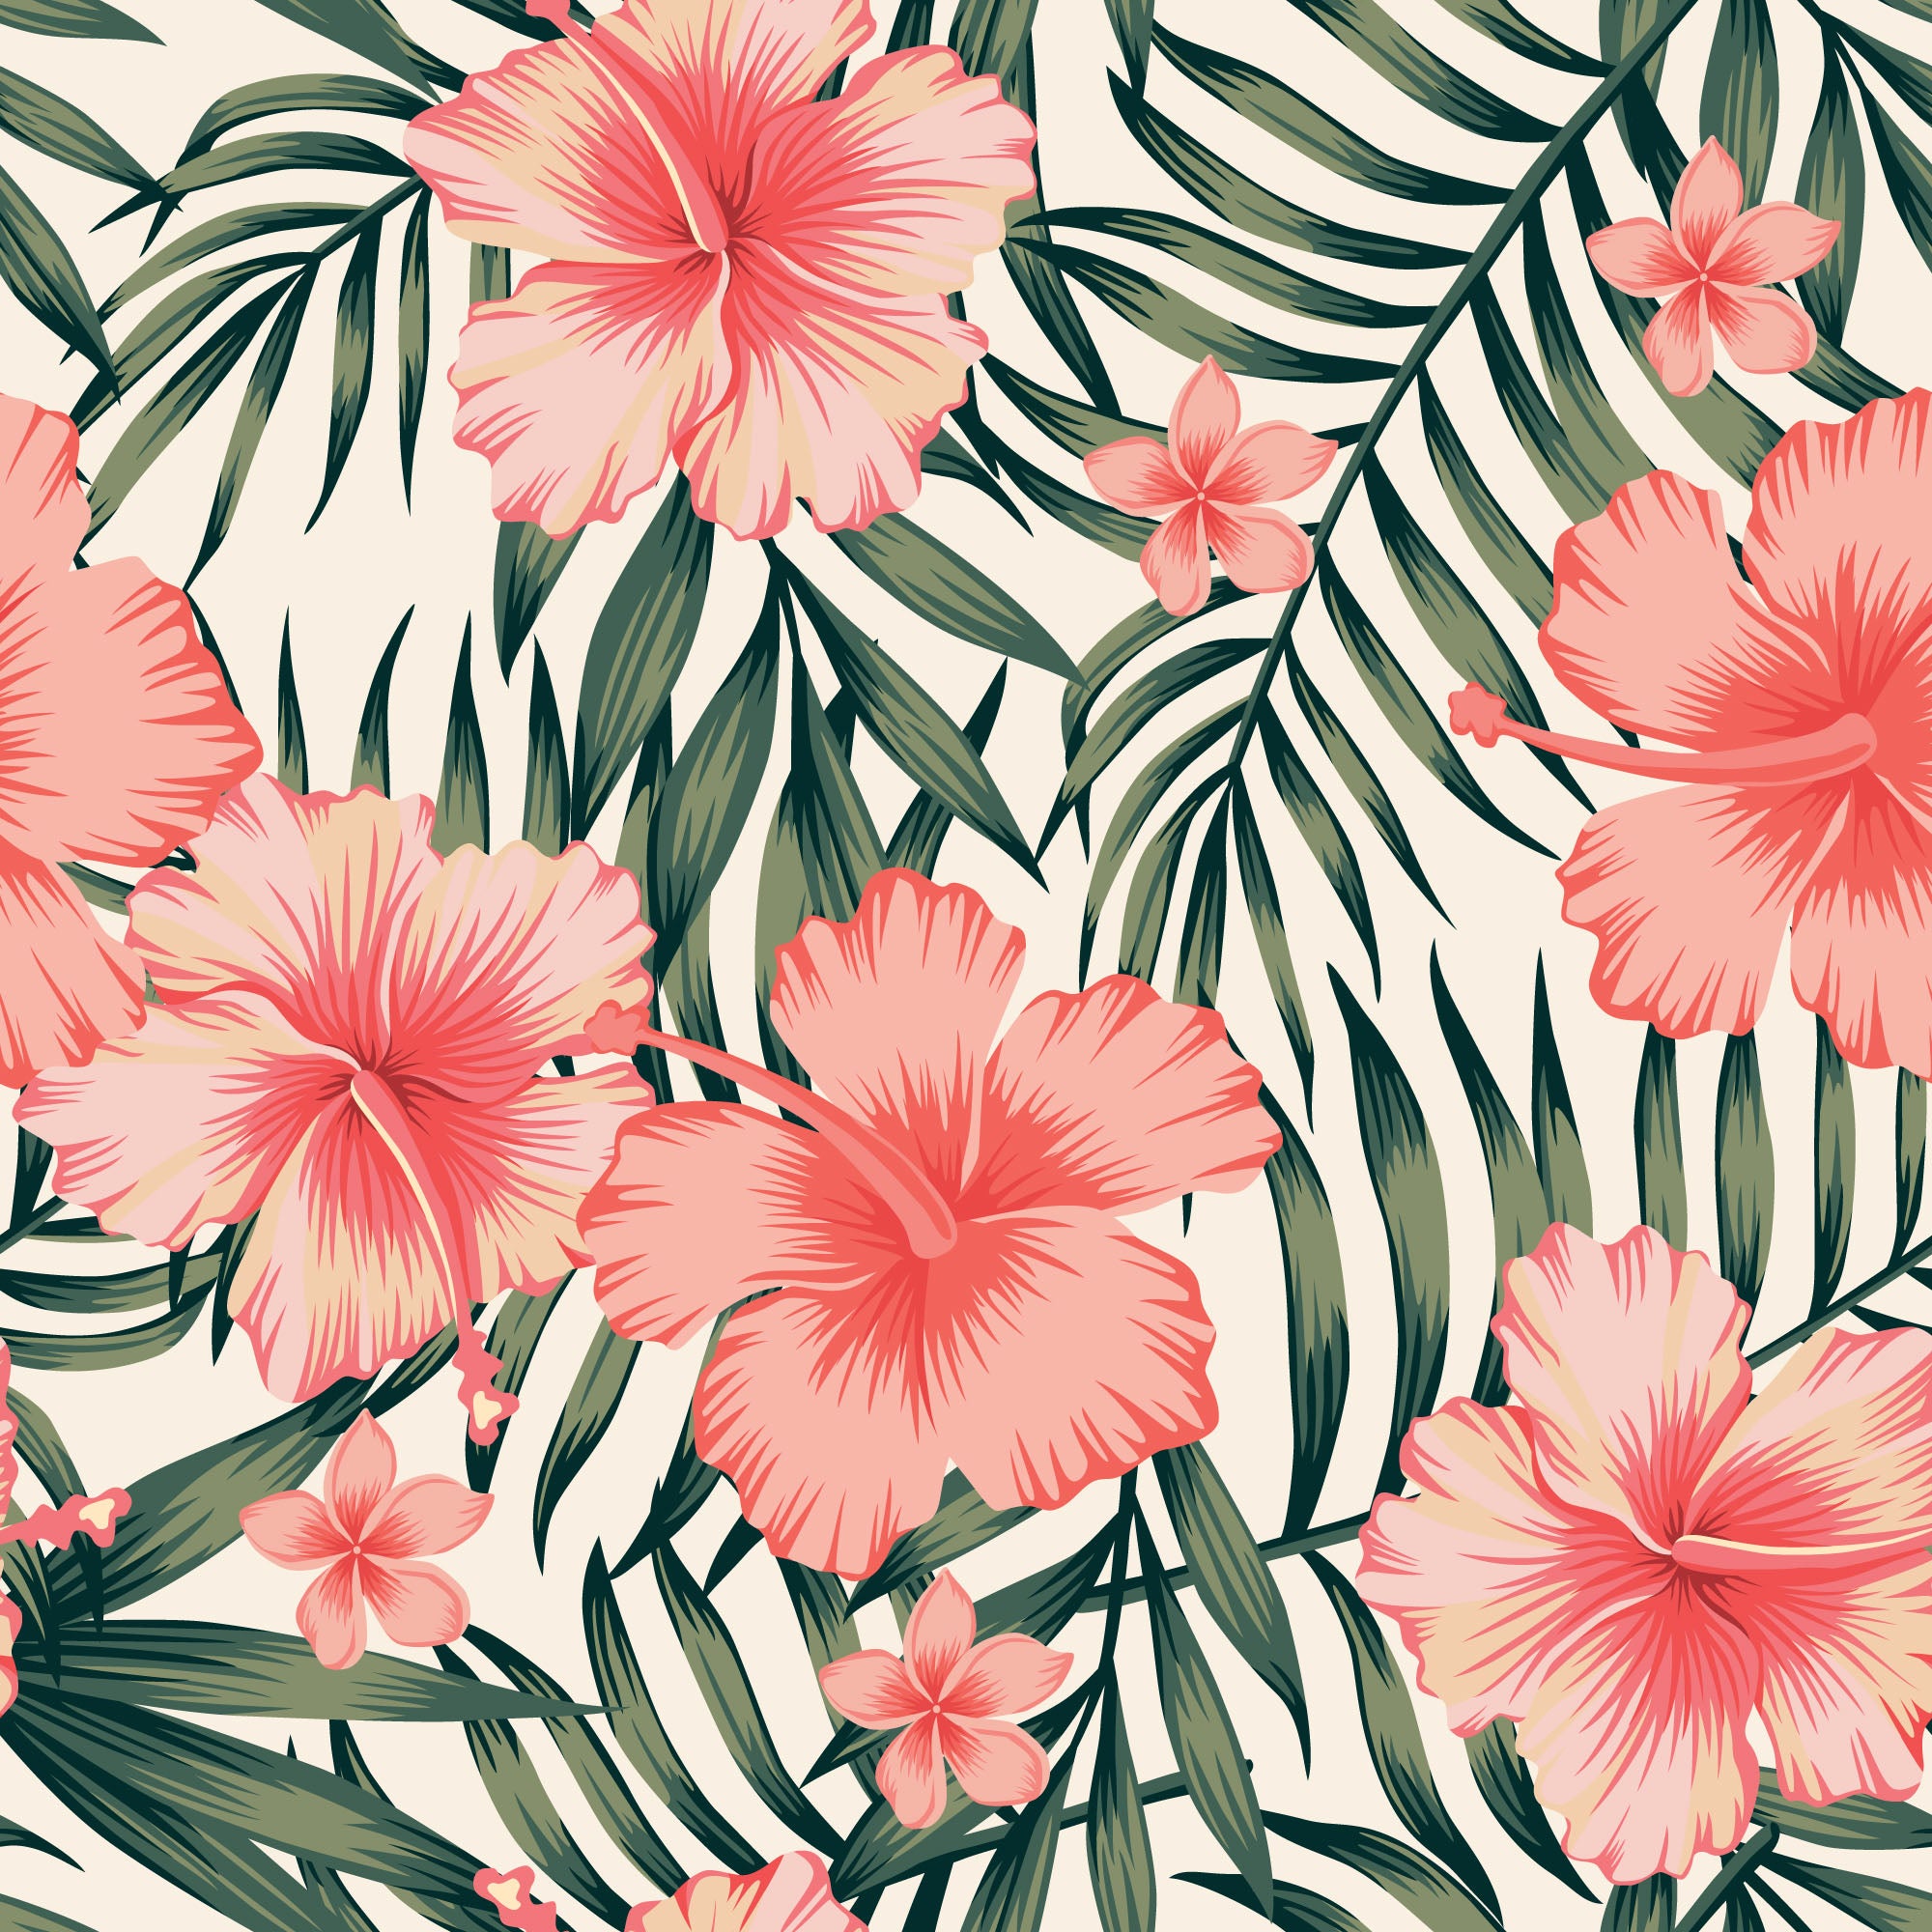 Sila - Peach and Green Tropical Flowers and Leaves Wallpaper Mural